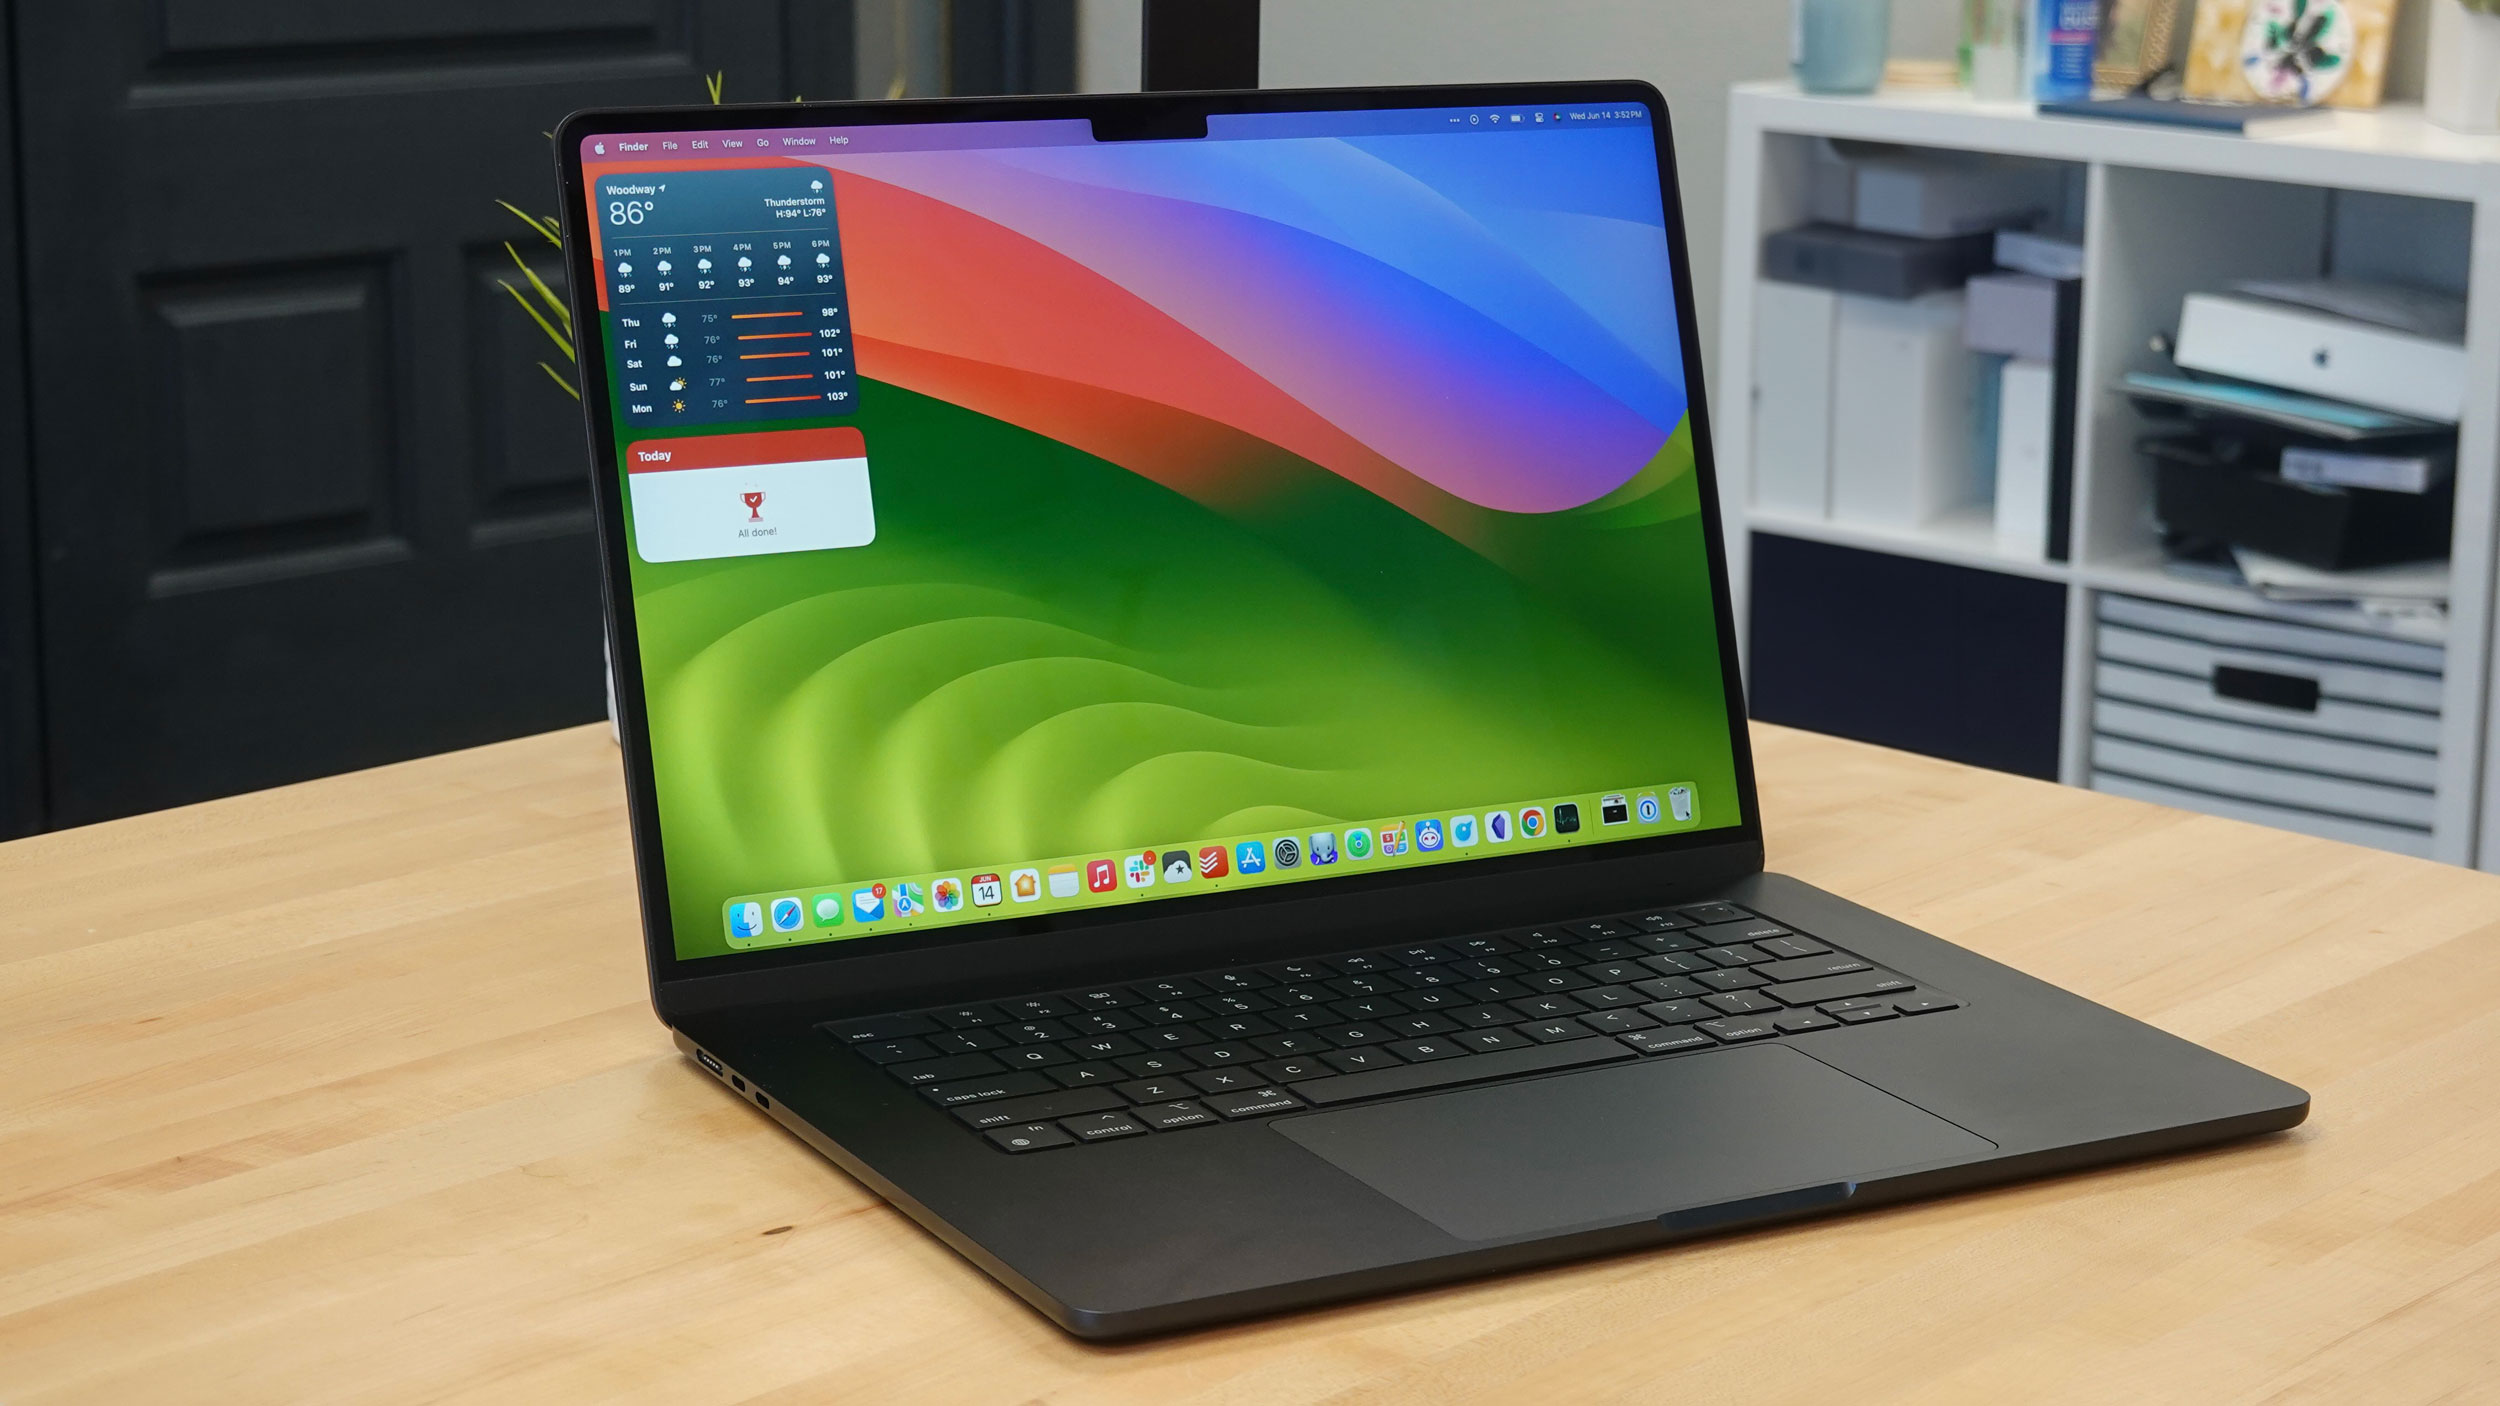 Take the M2 Pro MacBook Pro to college and save $250